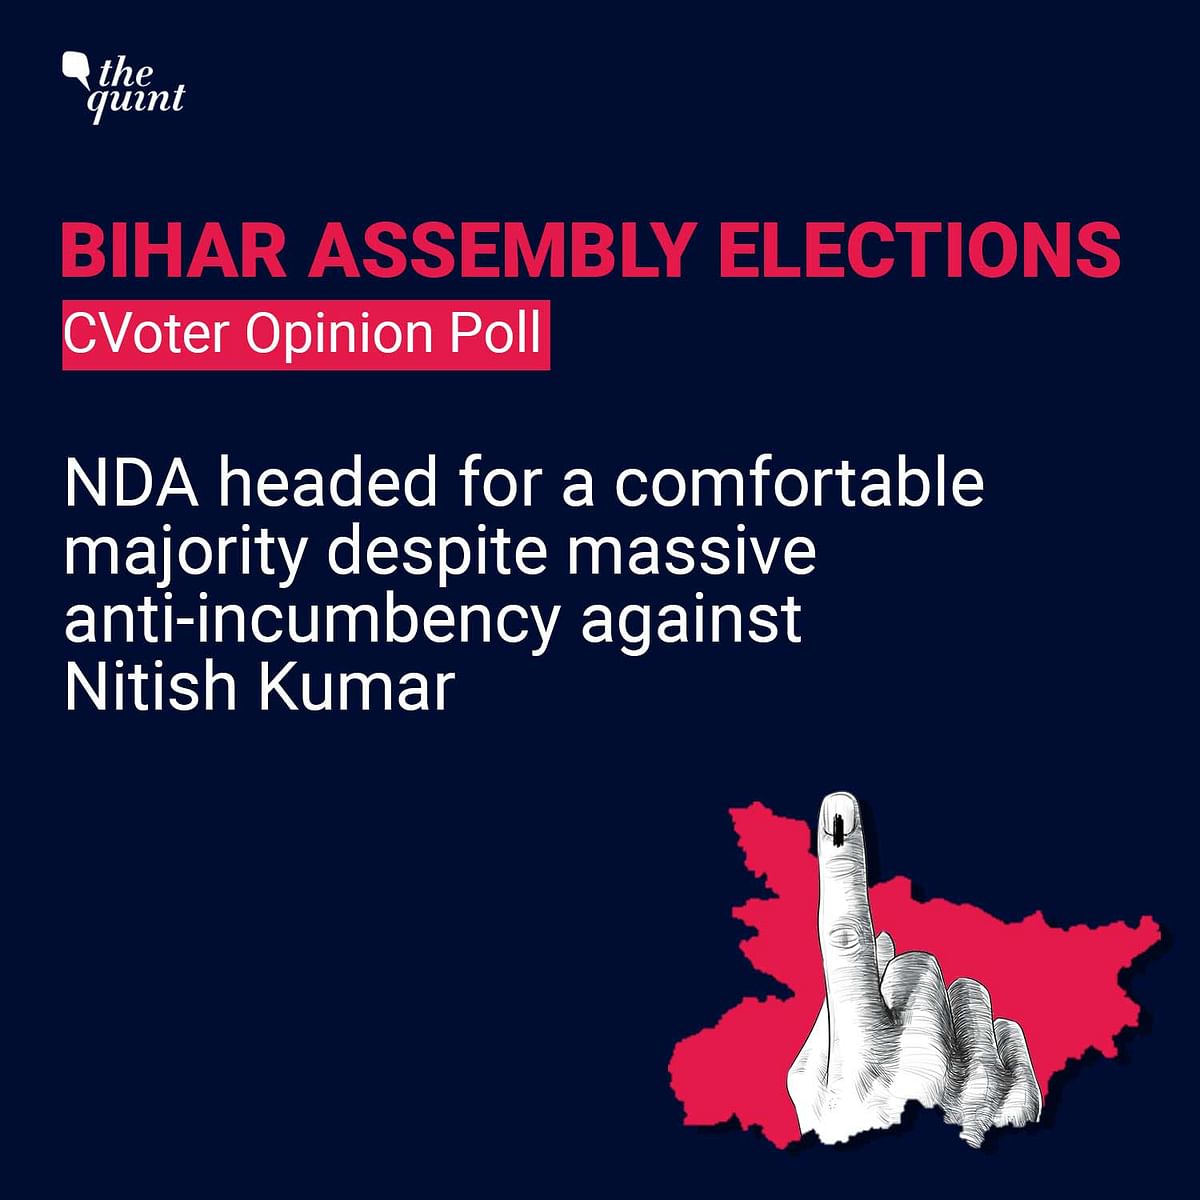 The NDA could win 141-161 seats ahead of UPA at 64-84. 56.7% said they are angry with the Nitish Kumar government.